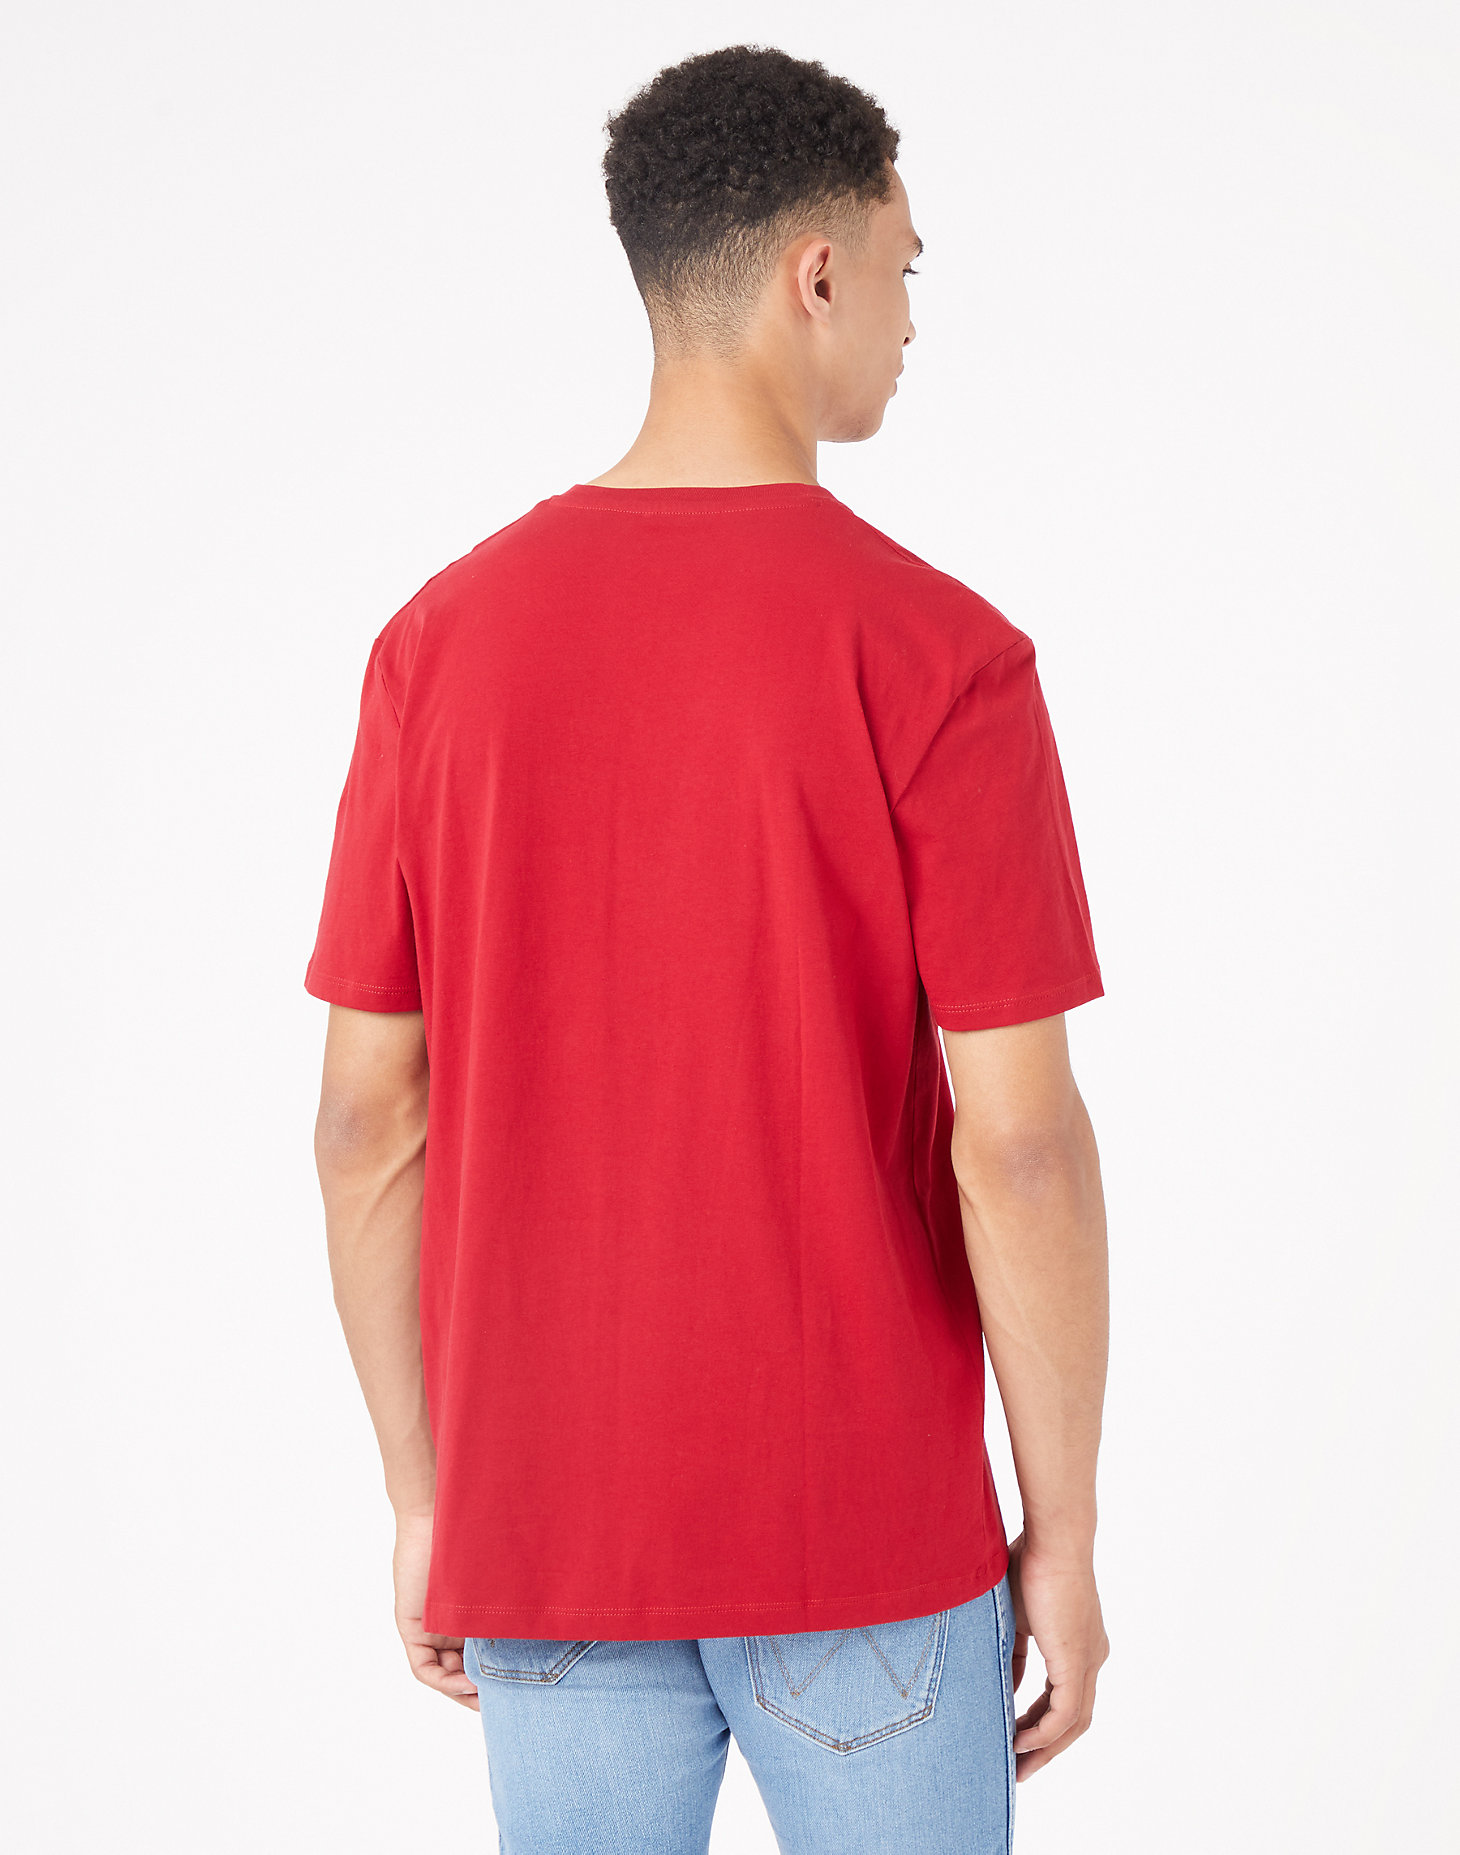 Frame Logo Tee in Red alternative view 2